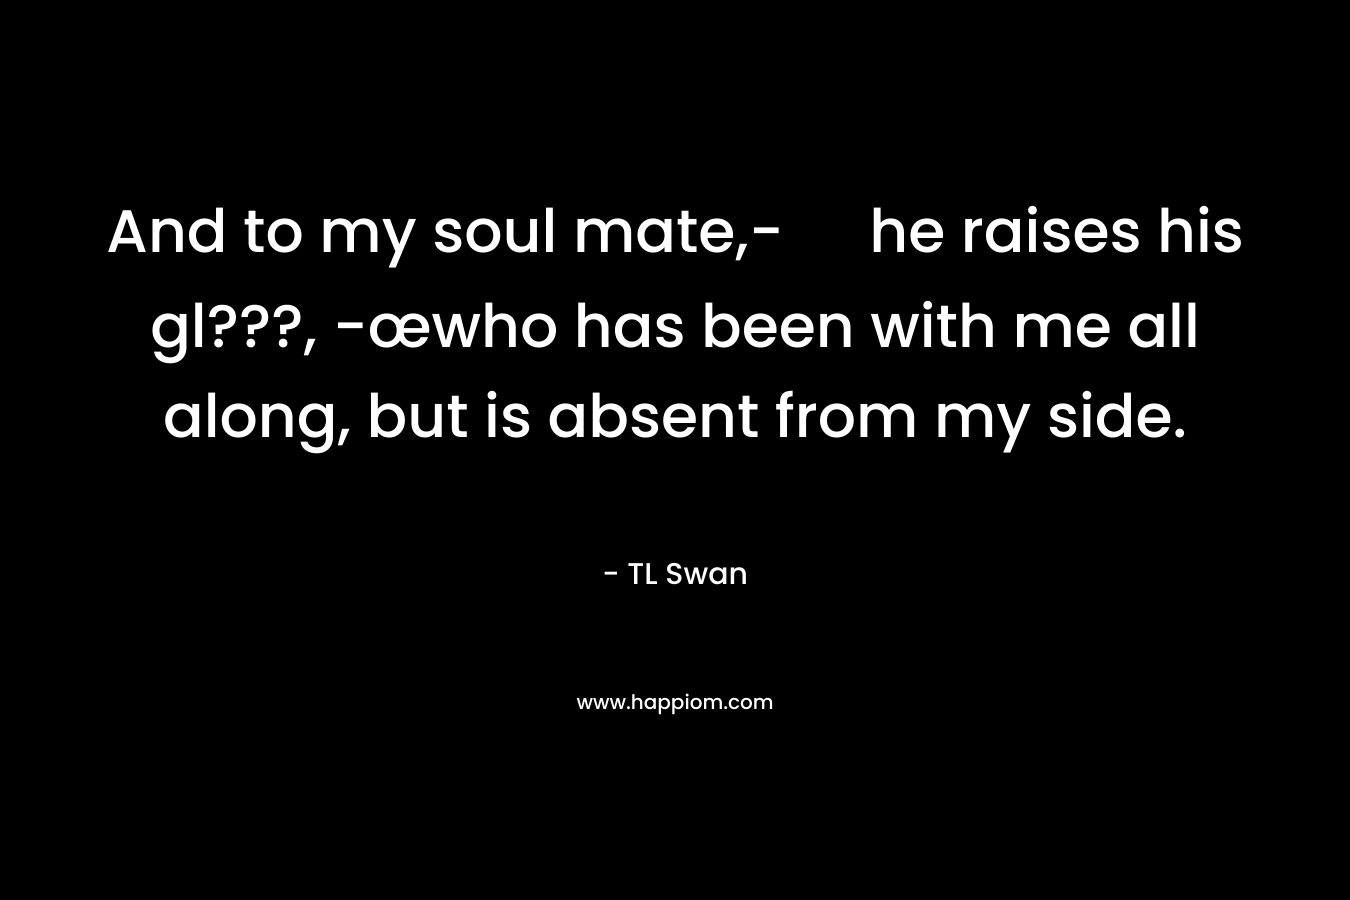 And to my soul mate,- he raises his gl???, -œwho has been with me all along, but is absent from my side.